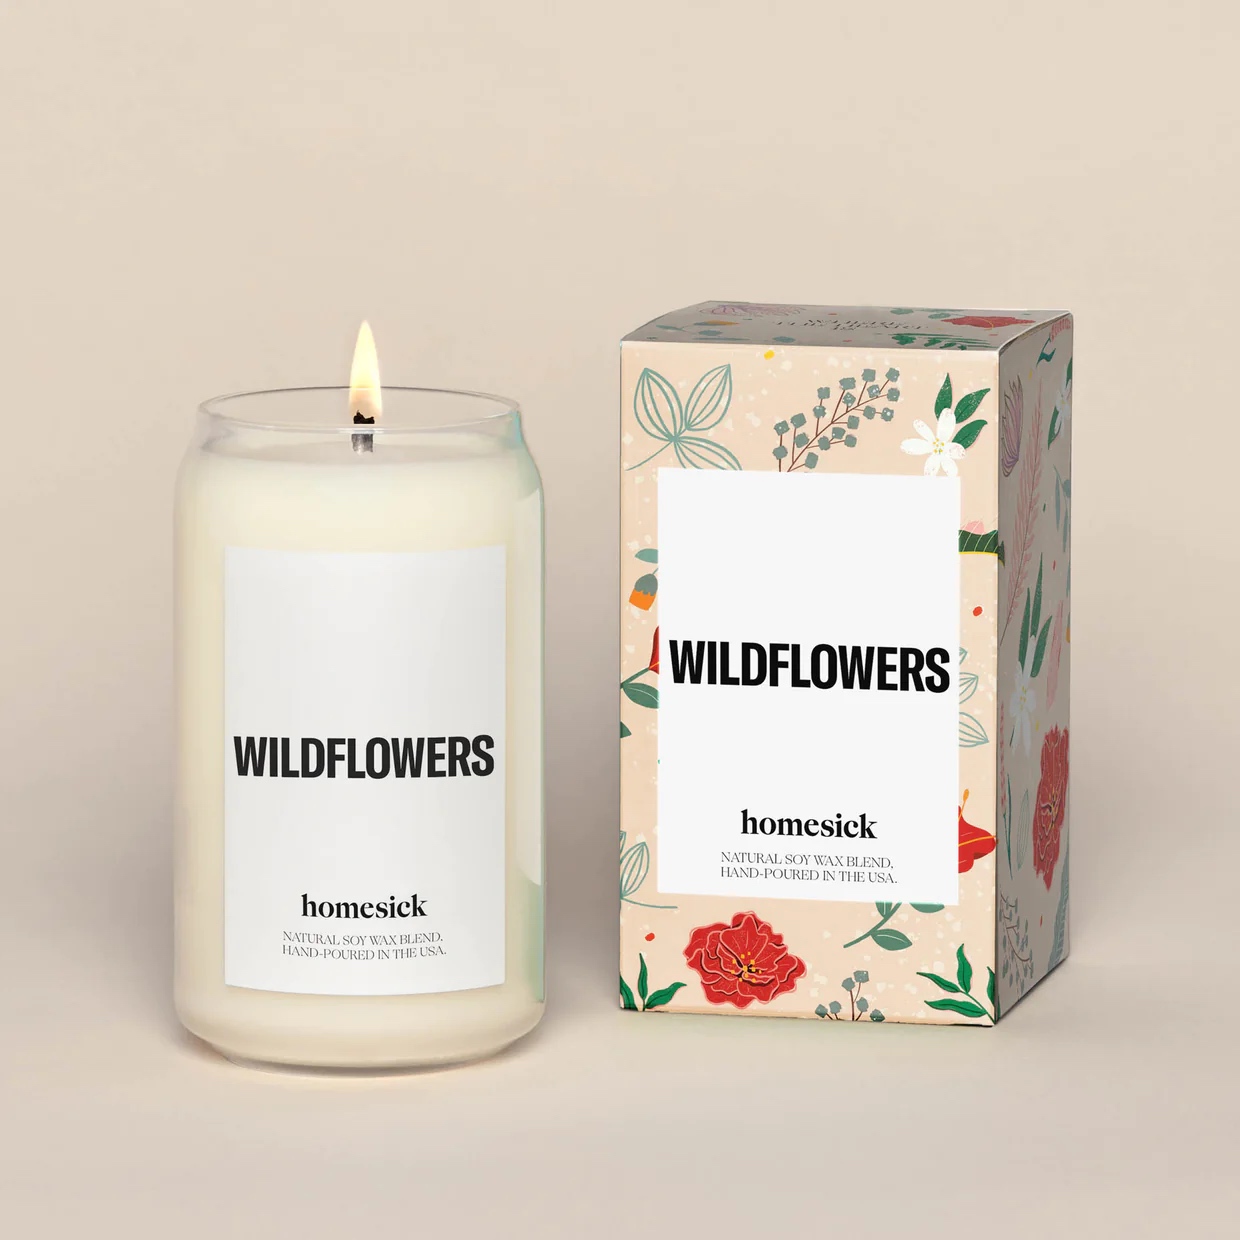 Homesick Scented Candle HMS.Wildflowers.Candle.Ecom.1_1240x1240